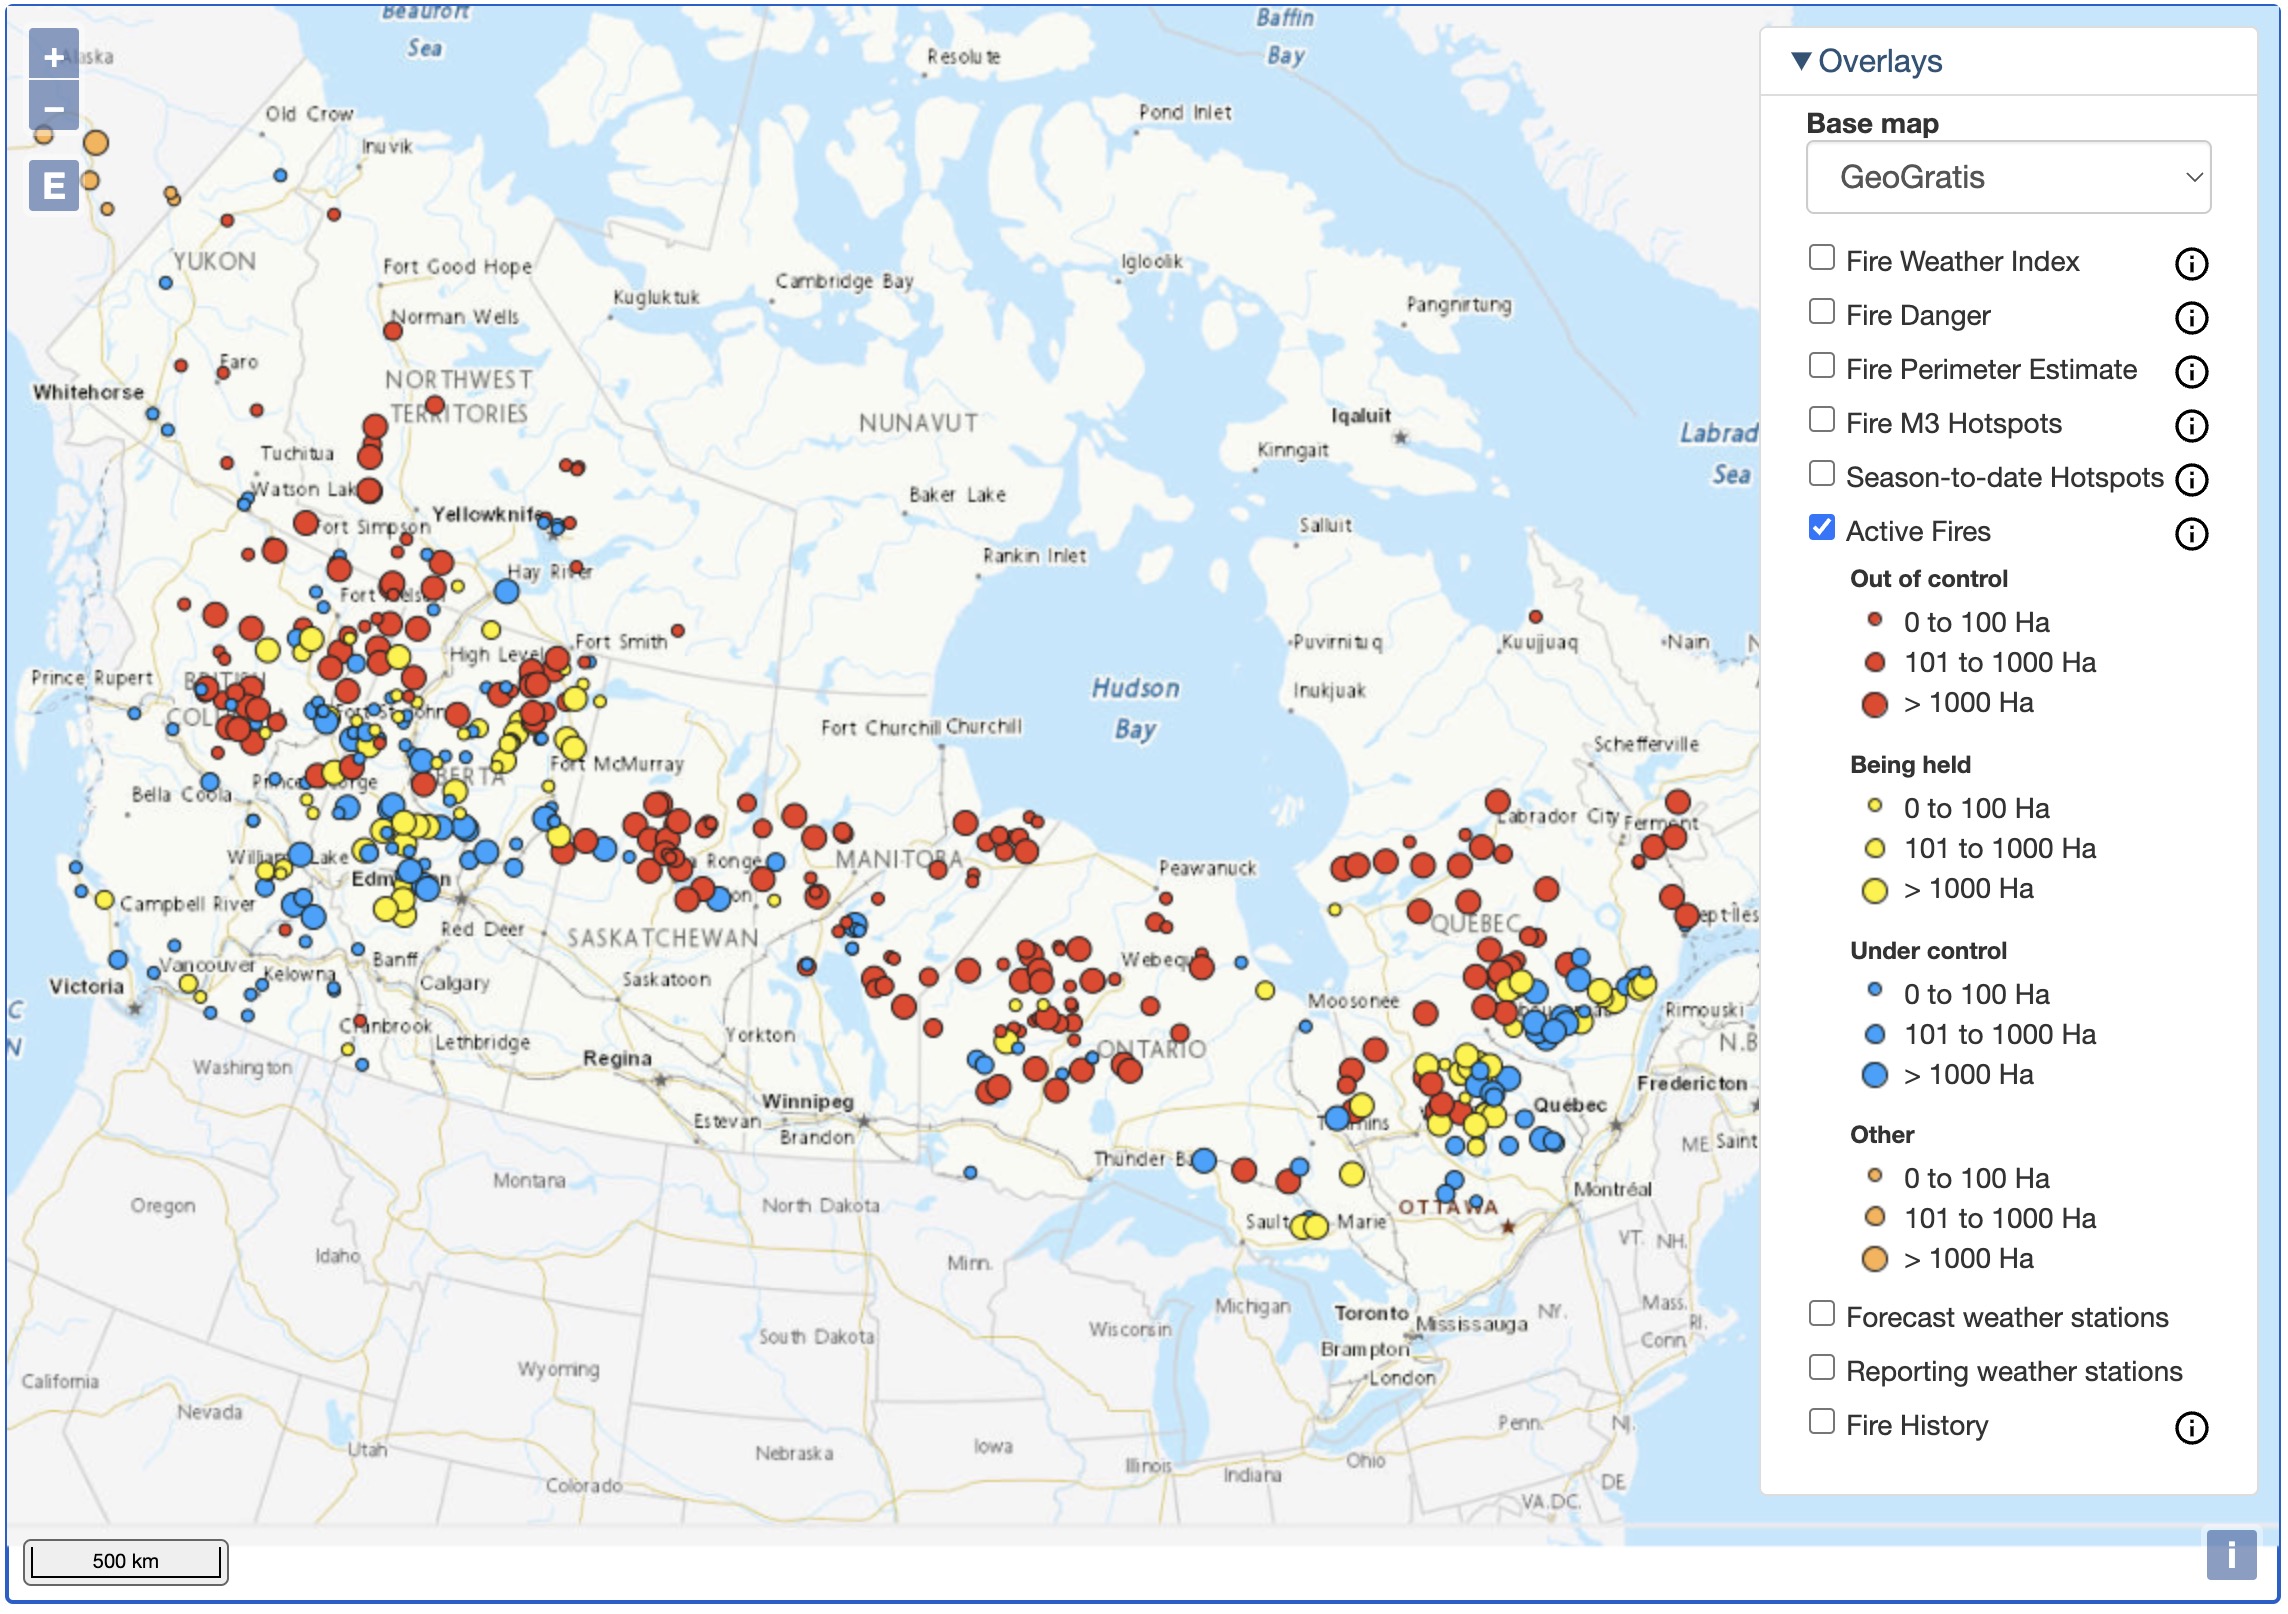 Canadian Wildland Fire Information System map